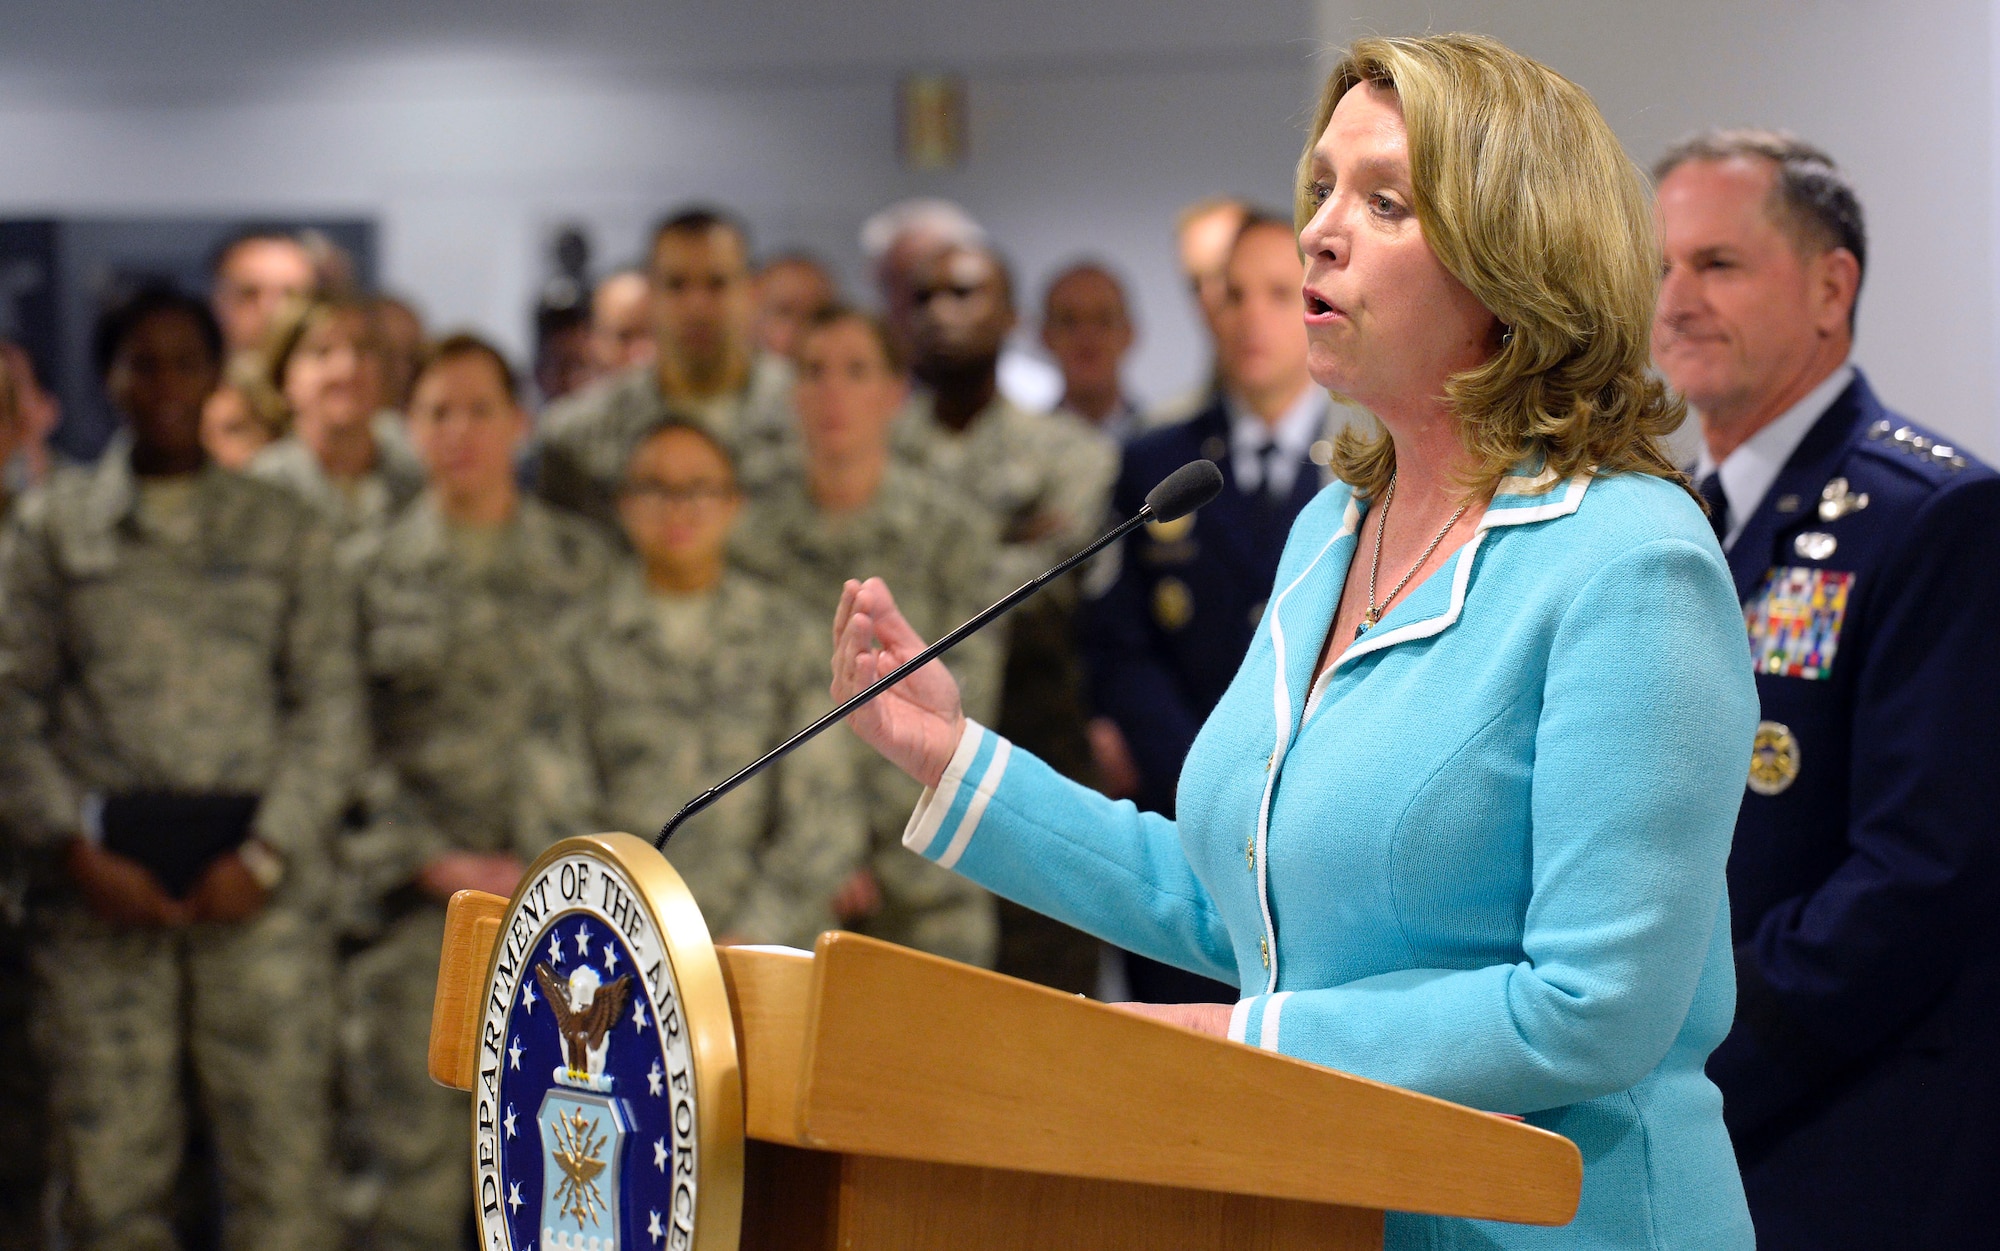 Air Force Secretary Deborah Lee James speaks during the announcement of the 18th Chief Master Sergeant of the Air Force at the Pentagon Nov. 16, 2016. Air Force Chief of Staff Gen. David L. Goldfein named Kaleth O. Wright as the Air Force’s next senior enlisted Airman. (U.S. Air Force photo/Staff Sgt. Alyssa C. Gibson)